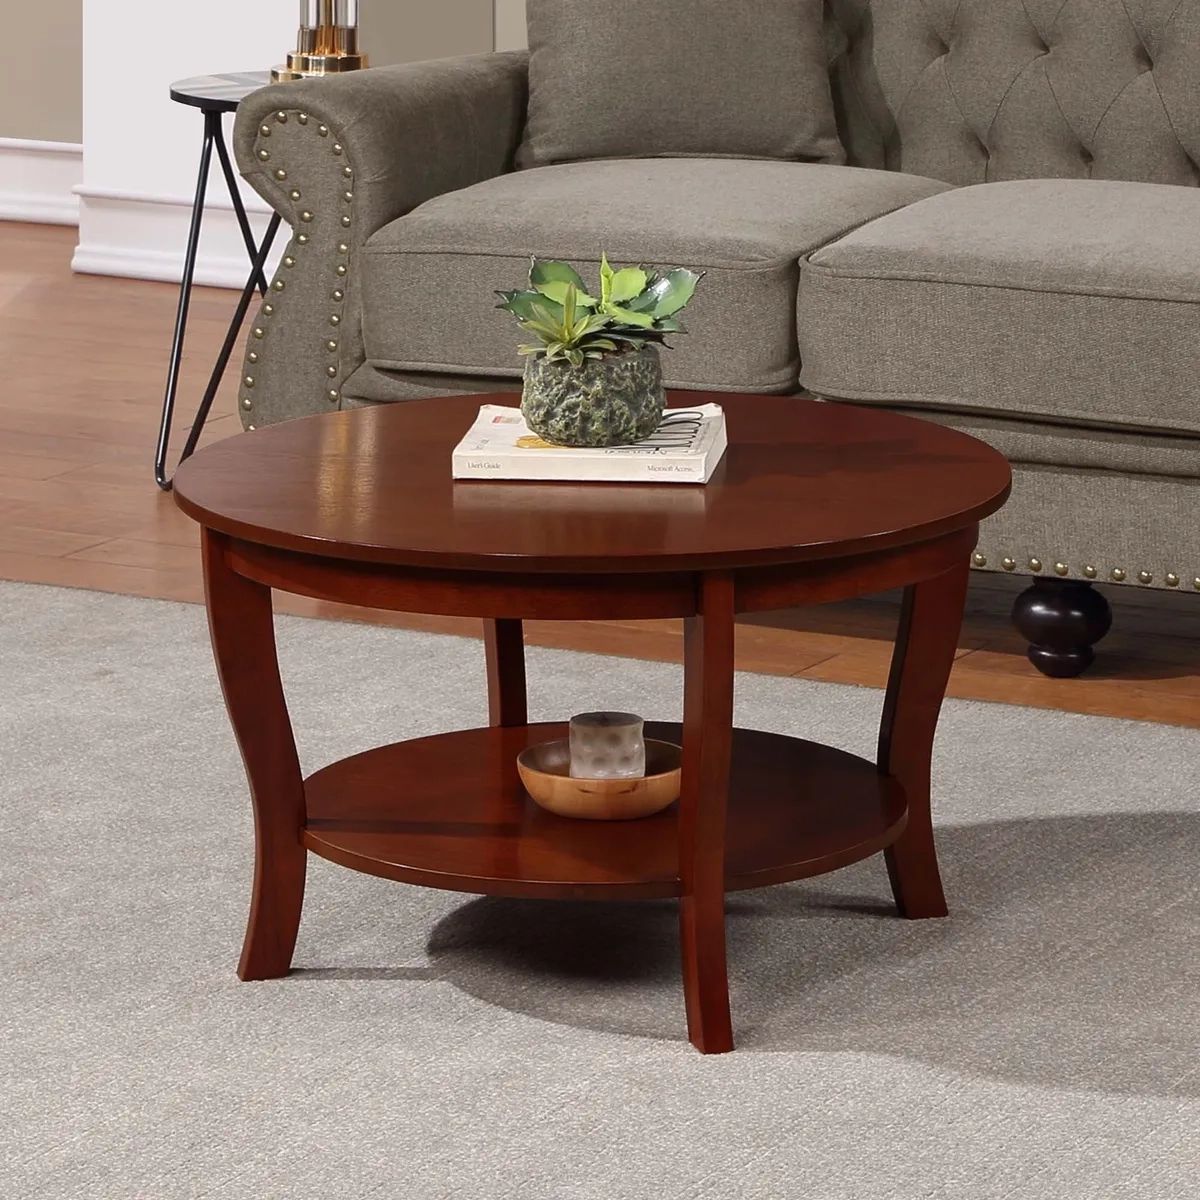 Convenience Concepts American Heritage Round Coffee Table With Shelf,  Mahogany | Ebay Within American Heritage Round Coffee Tables (View 2 of 15)